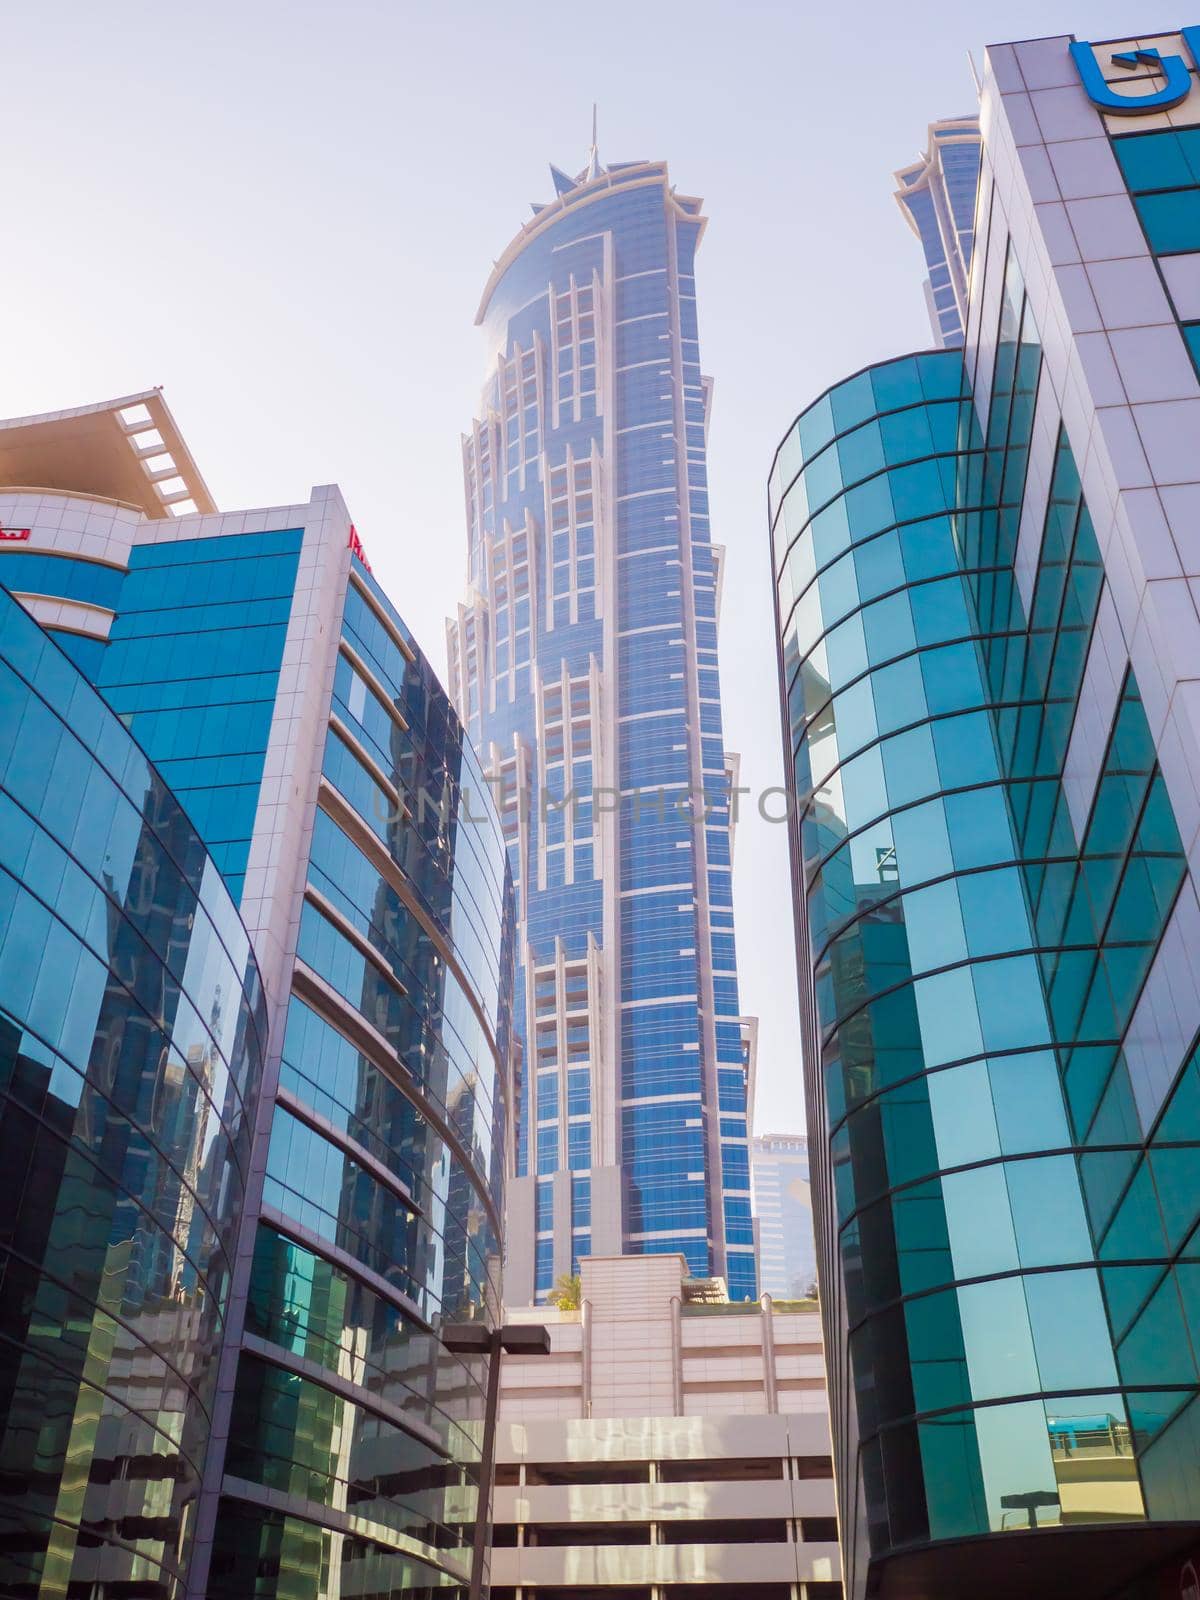 Streets with modern skyscrapers of the city of Dubai